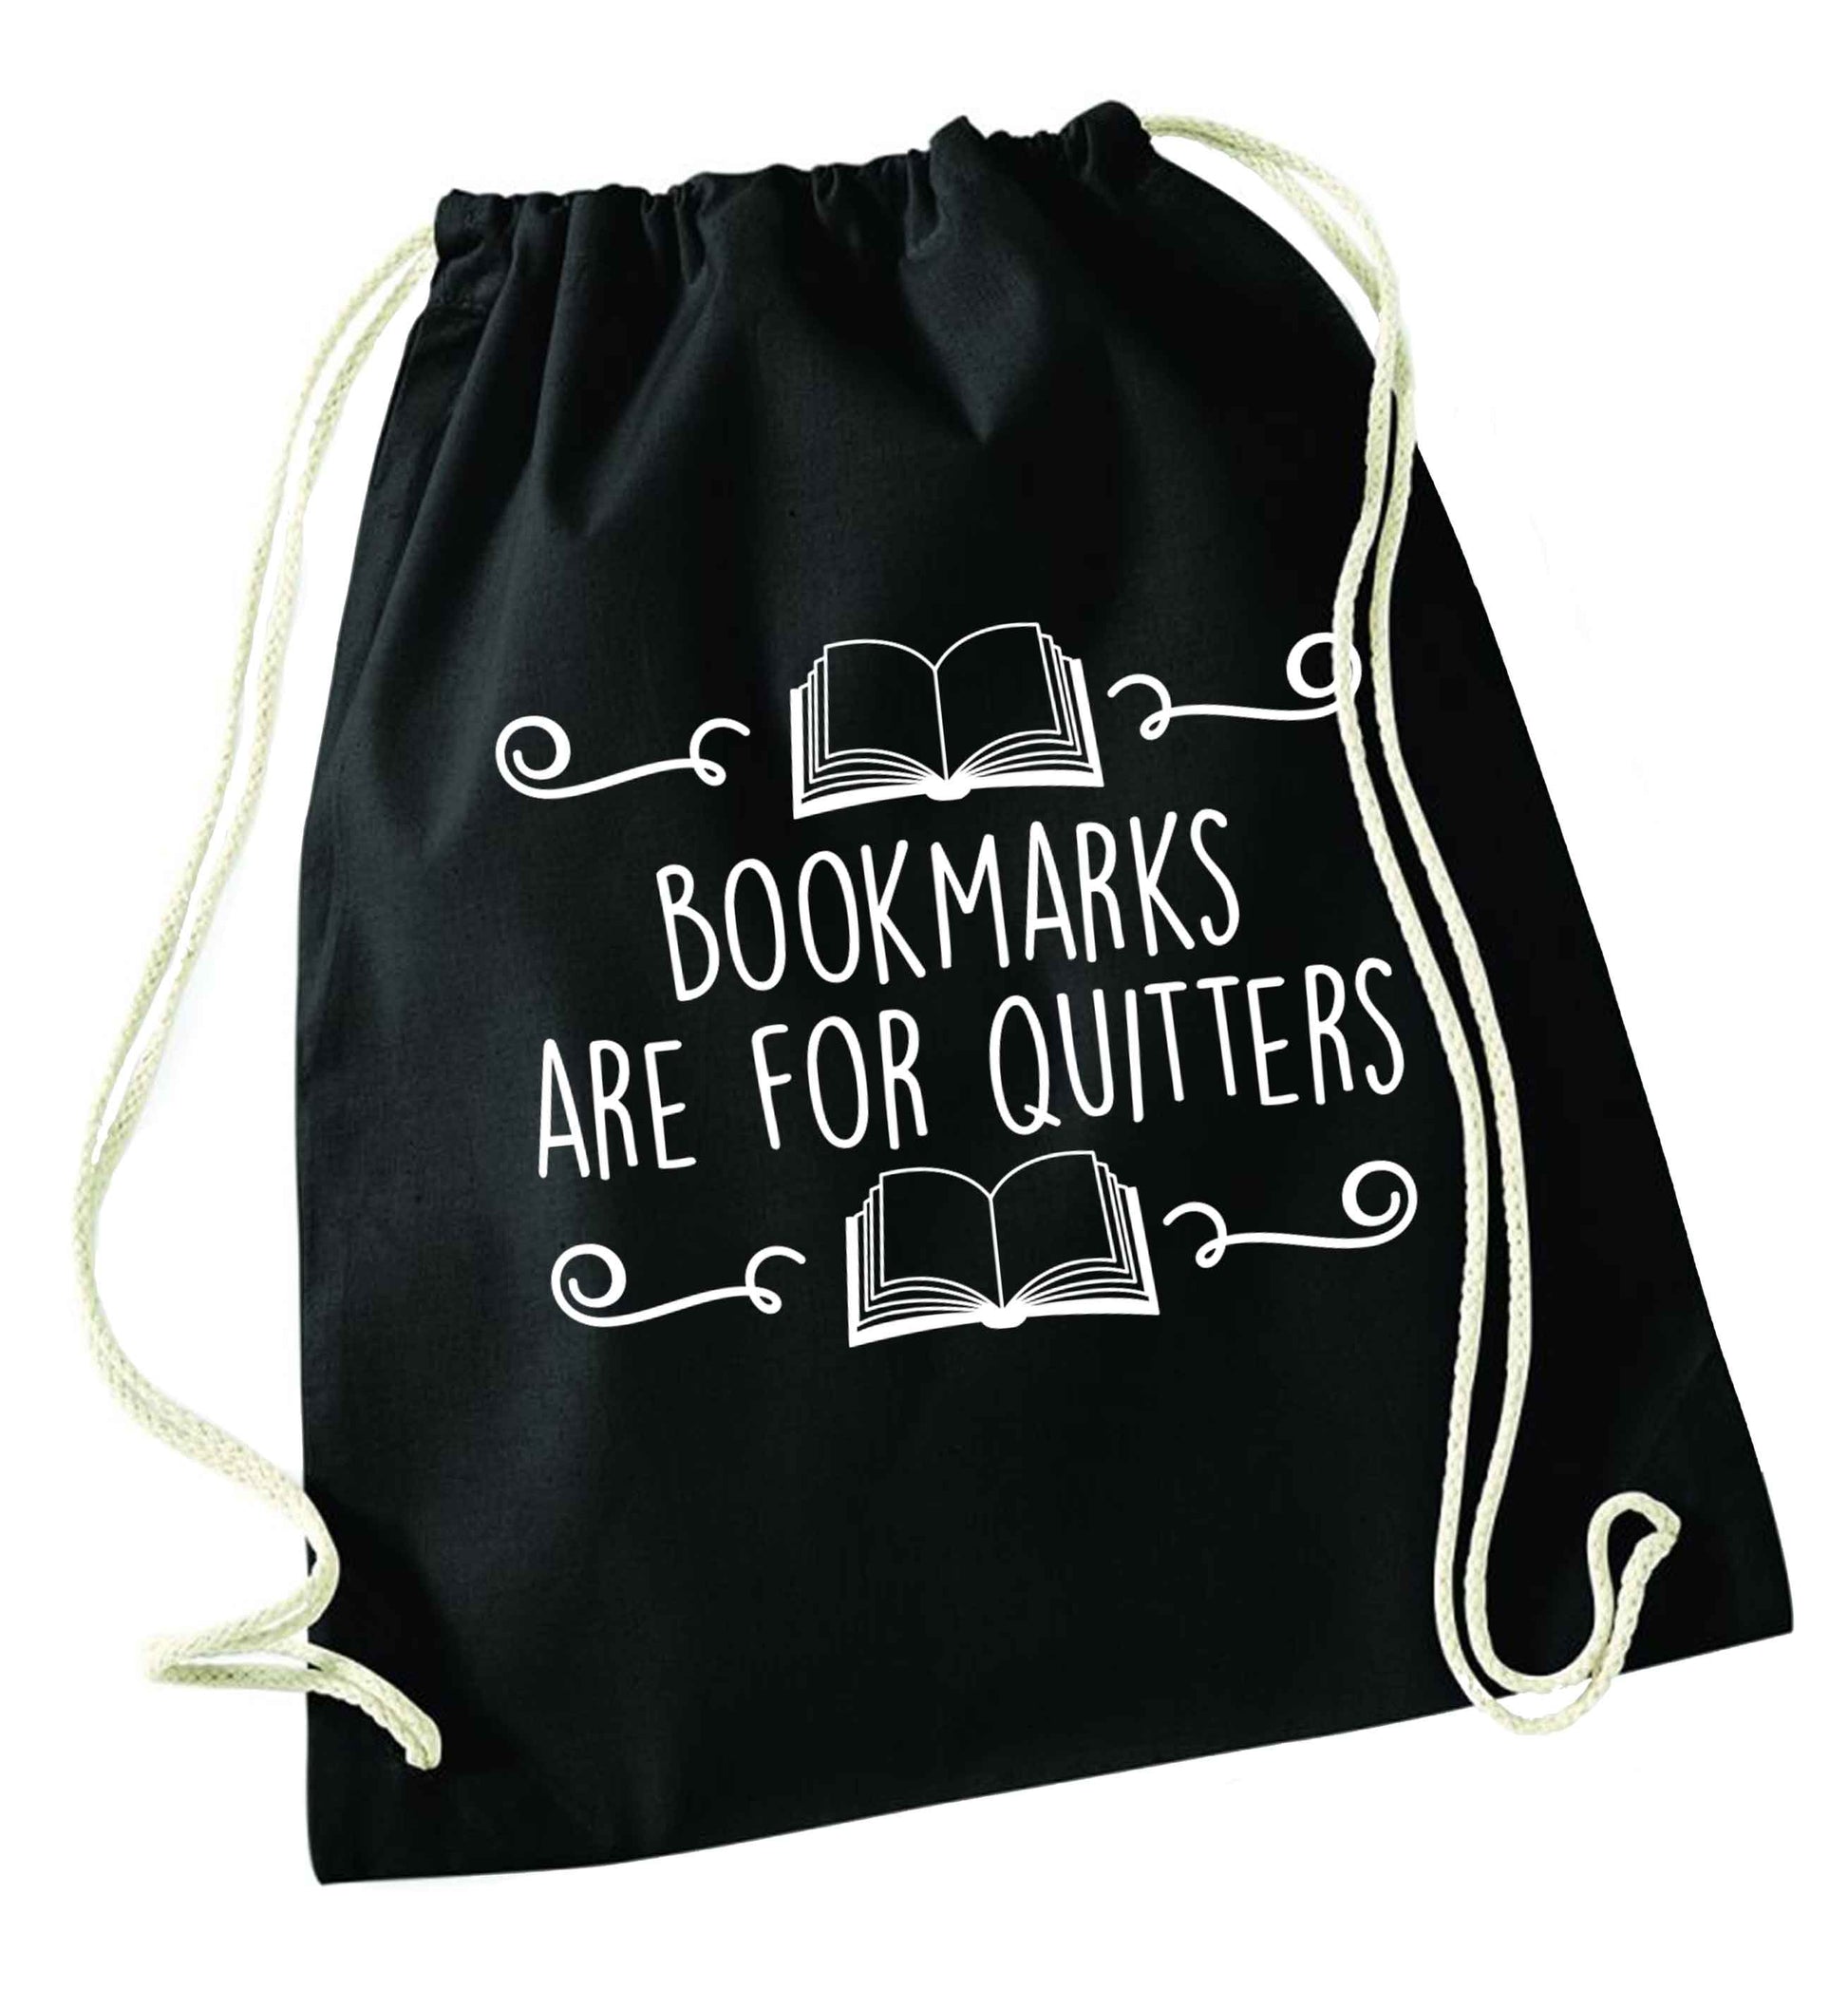 Bookmarks are for quitters black drawstring bag